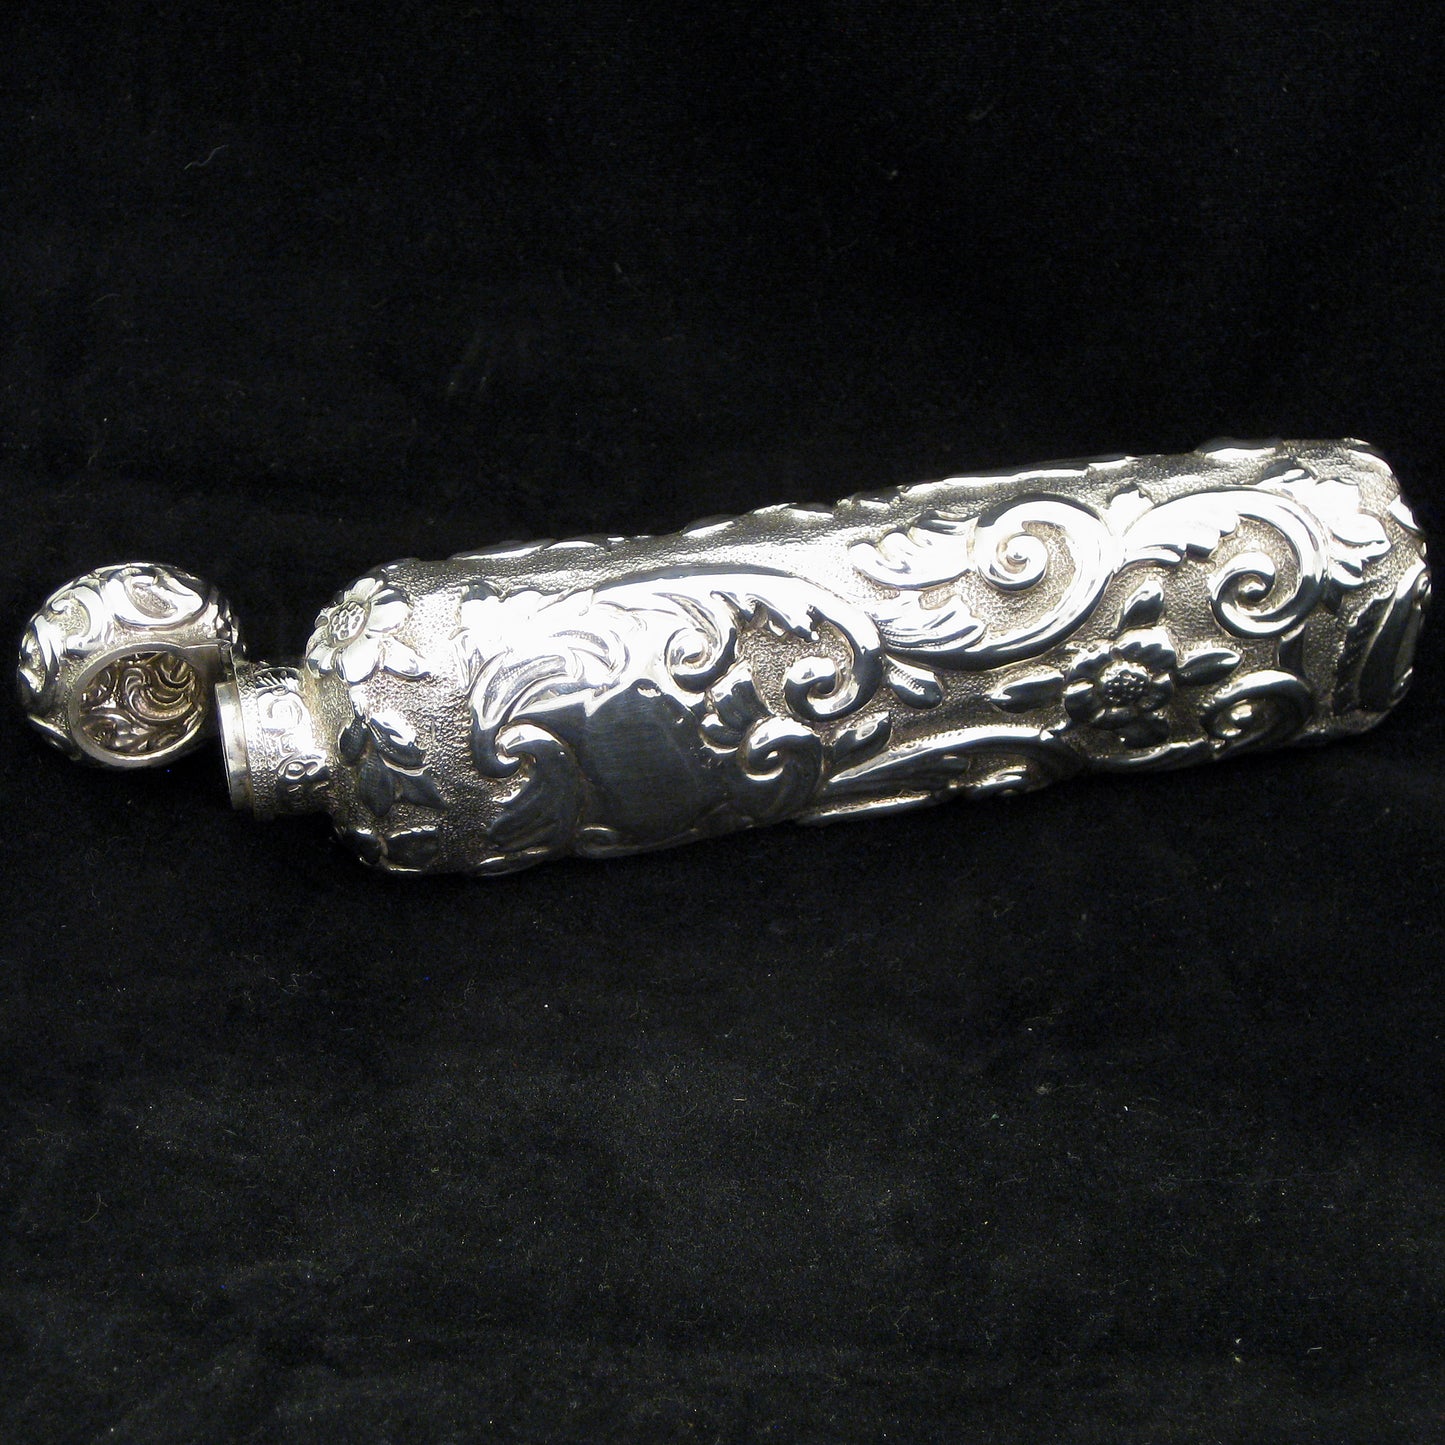 Highly decorative sterling silver perfume bottle.